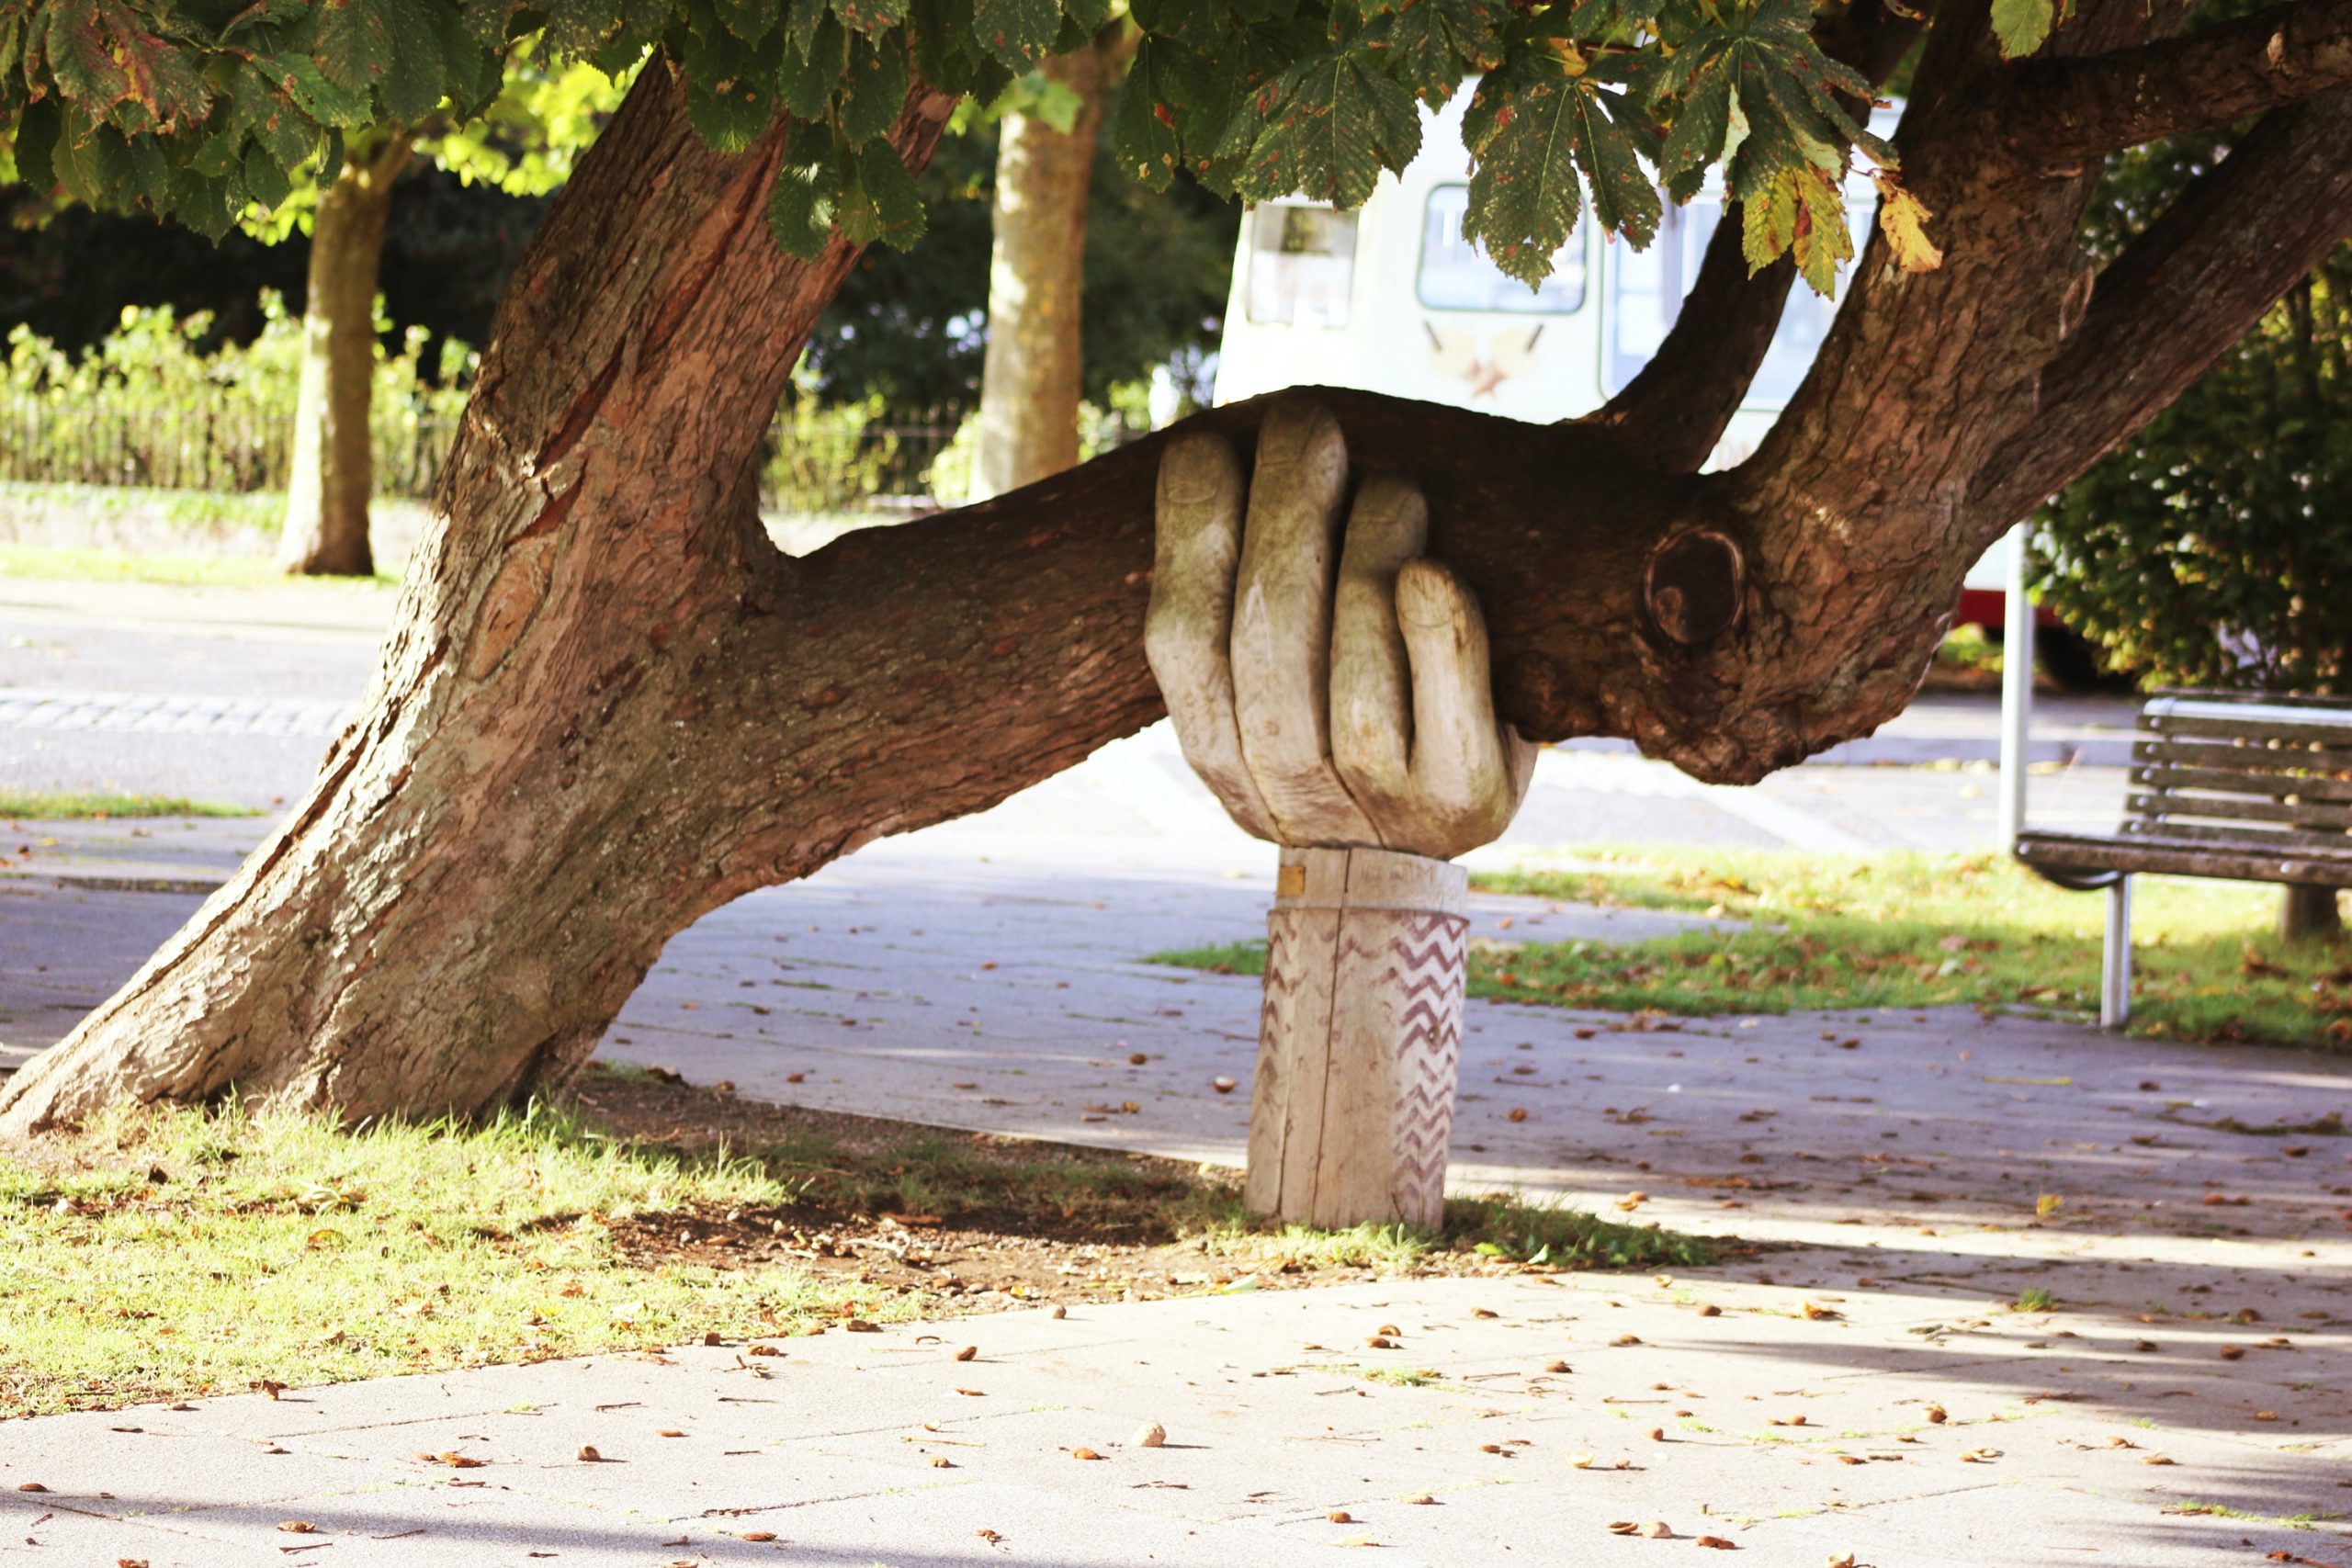 sculpture of a hand holding up a massive tree branch.